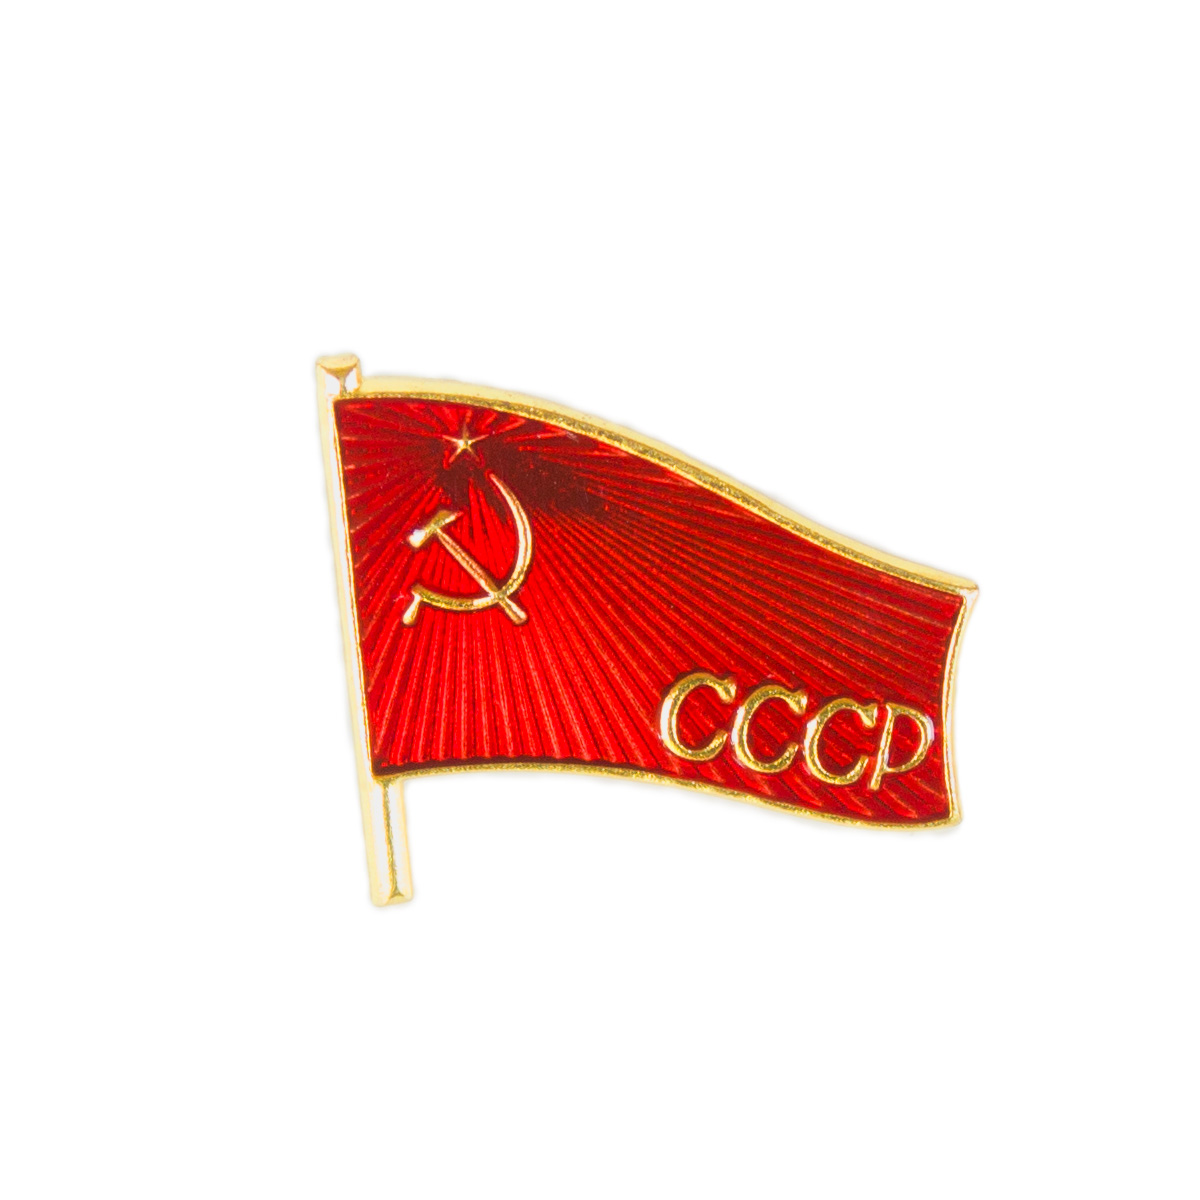 USSR Red Flag Badge with Hammer and Sickle